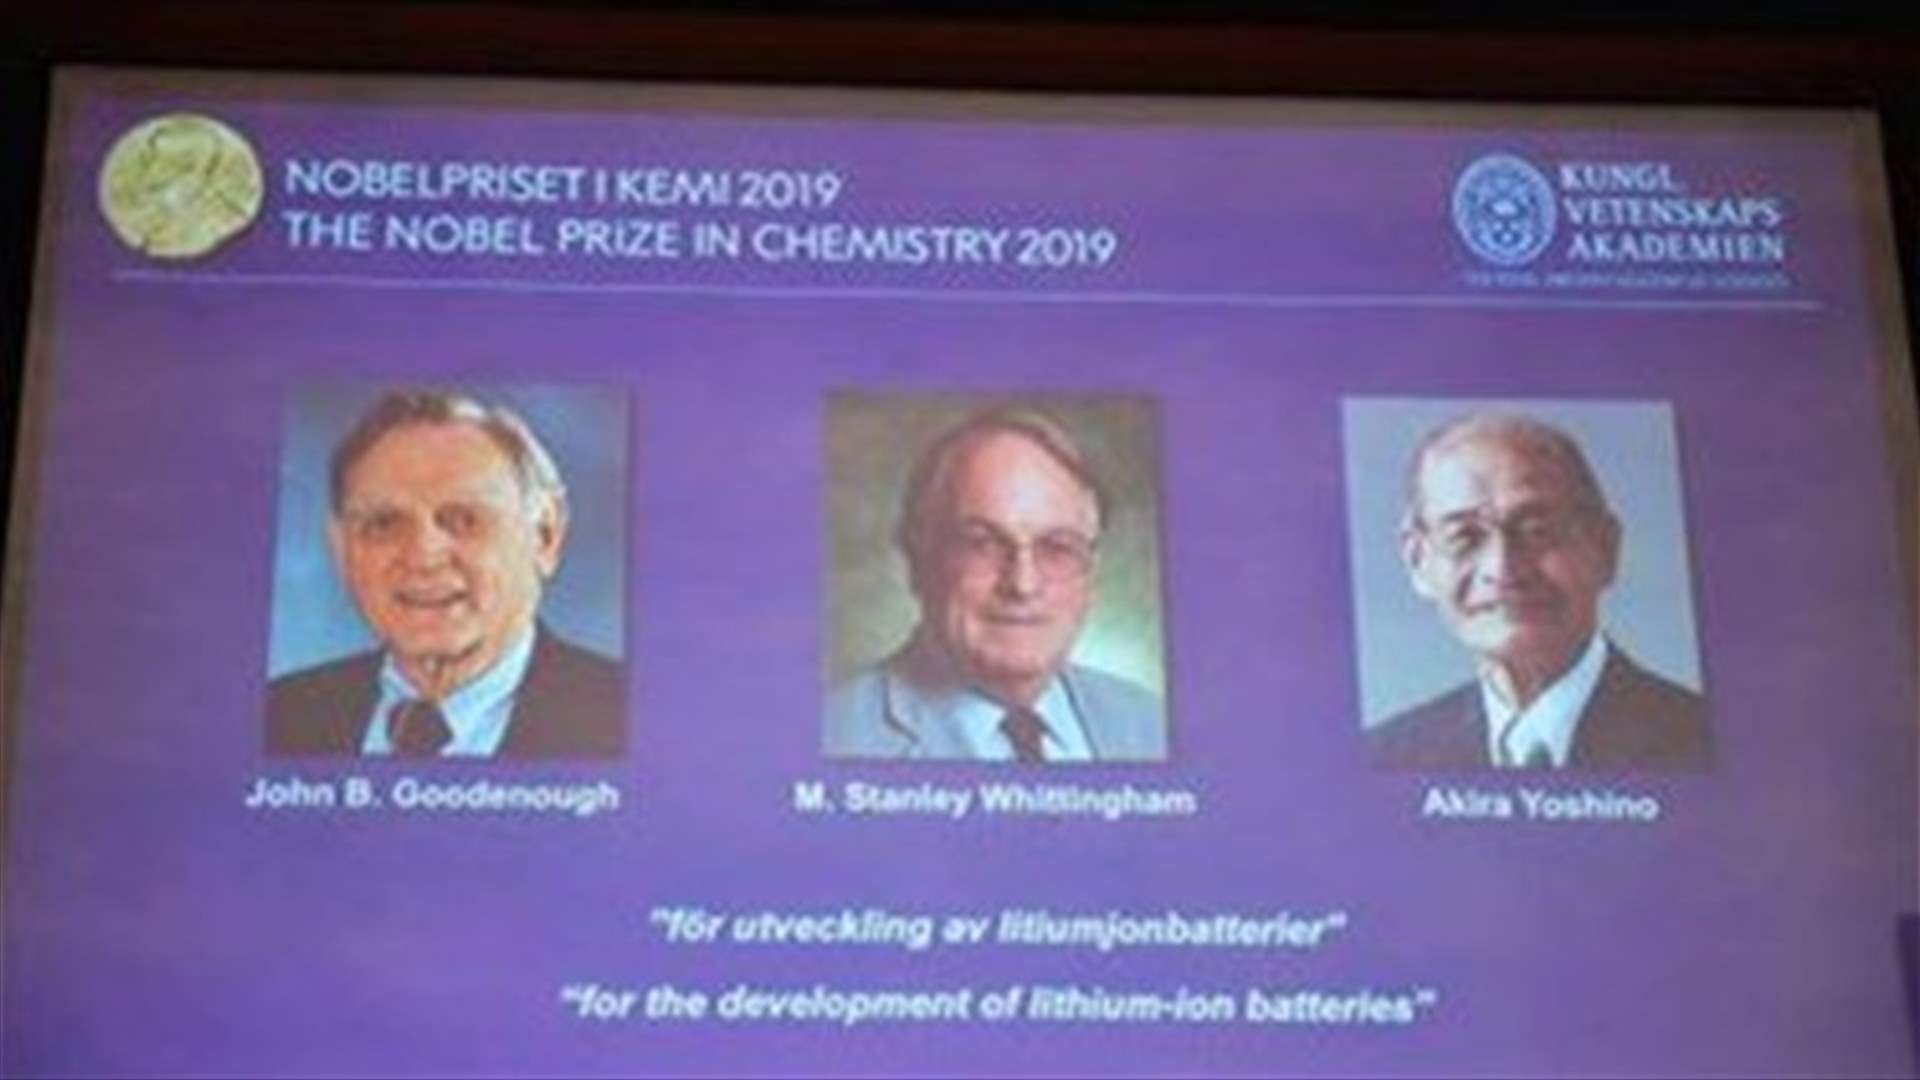 Battery pioneers who made mobile revolution possible win Nobel chemistry prize